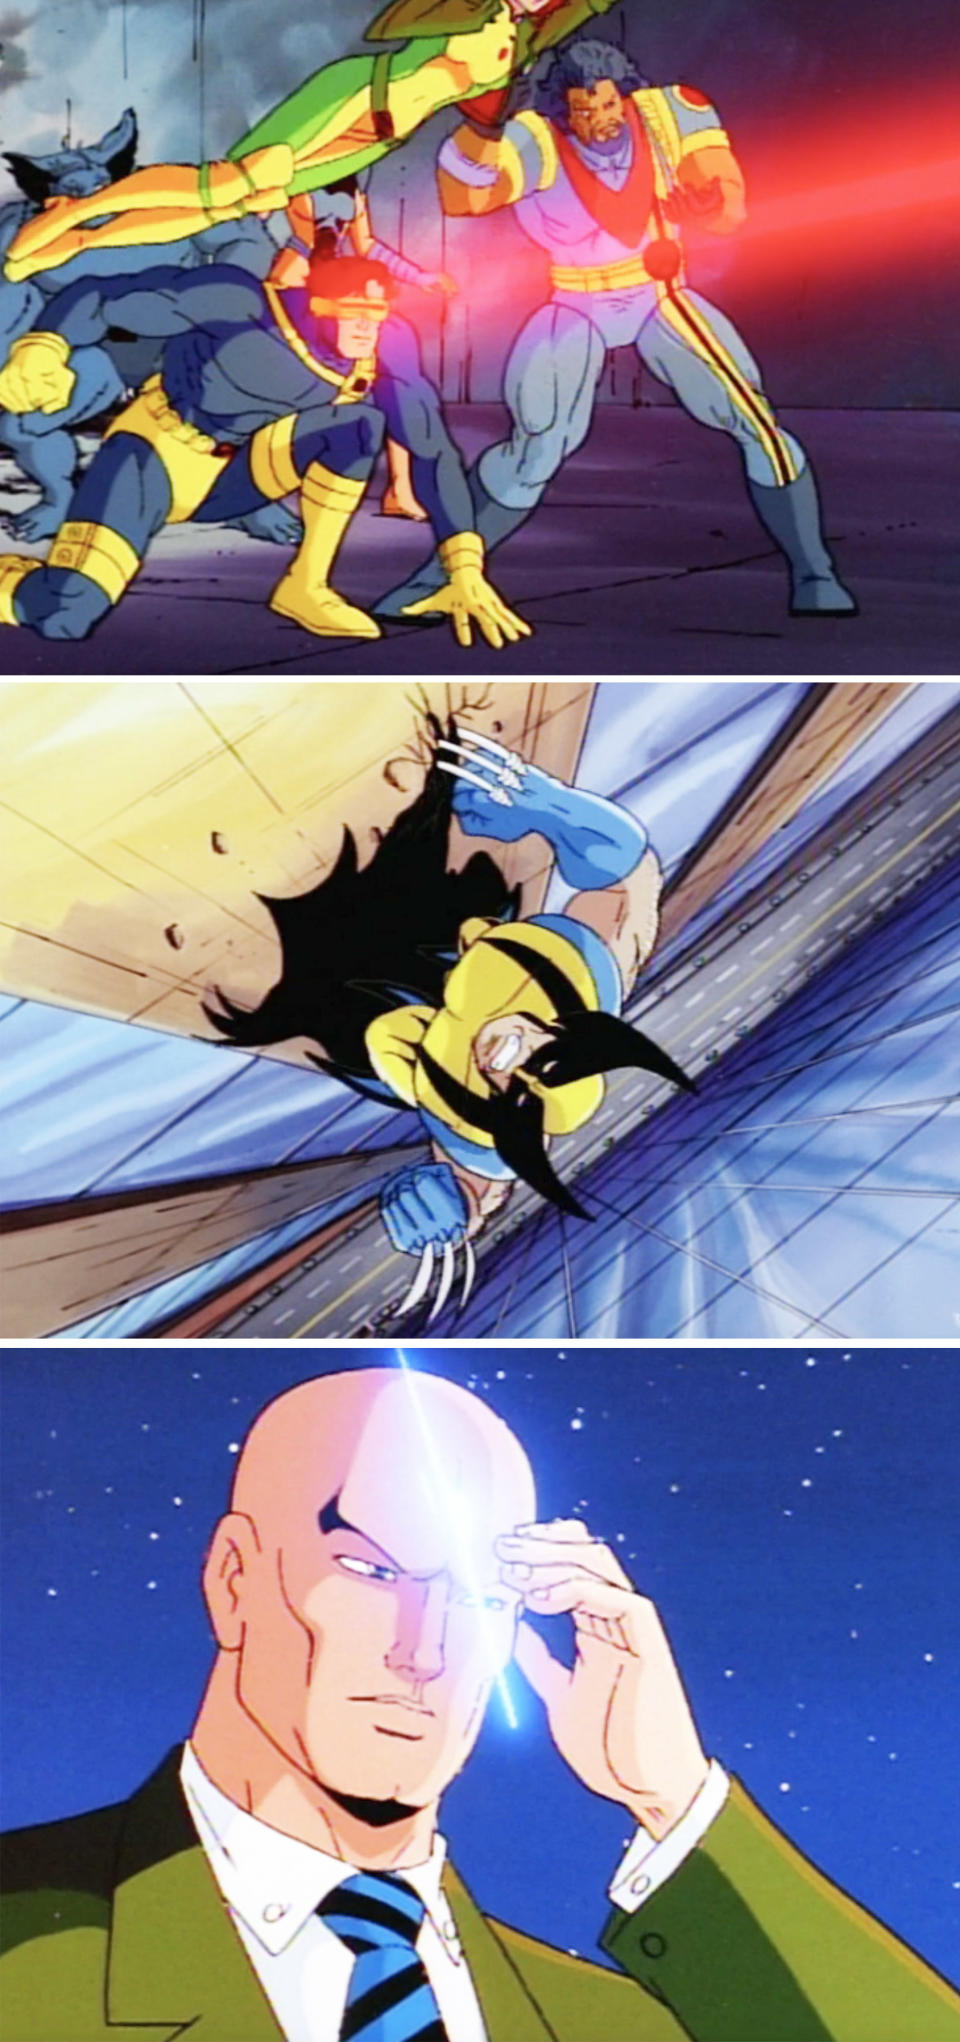 Wolverine in the animated series; Professor X in the animated series